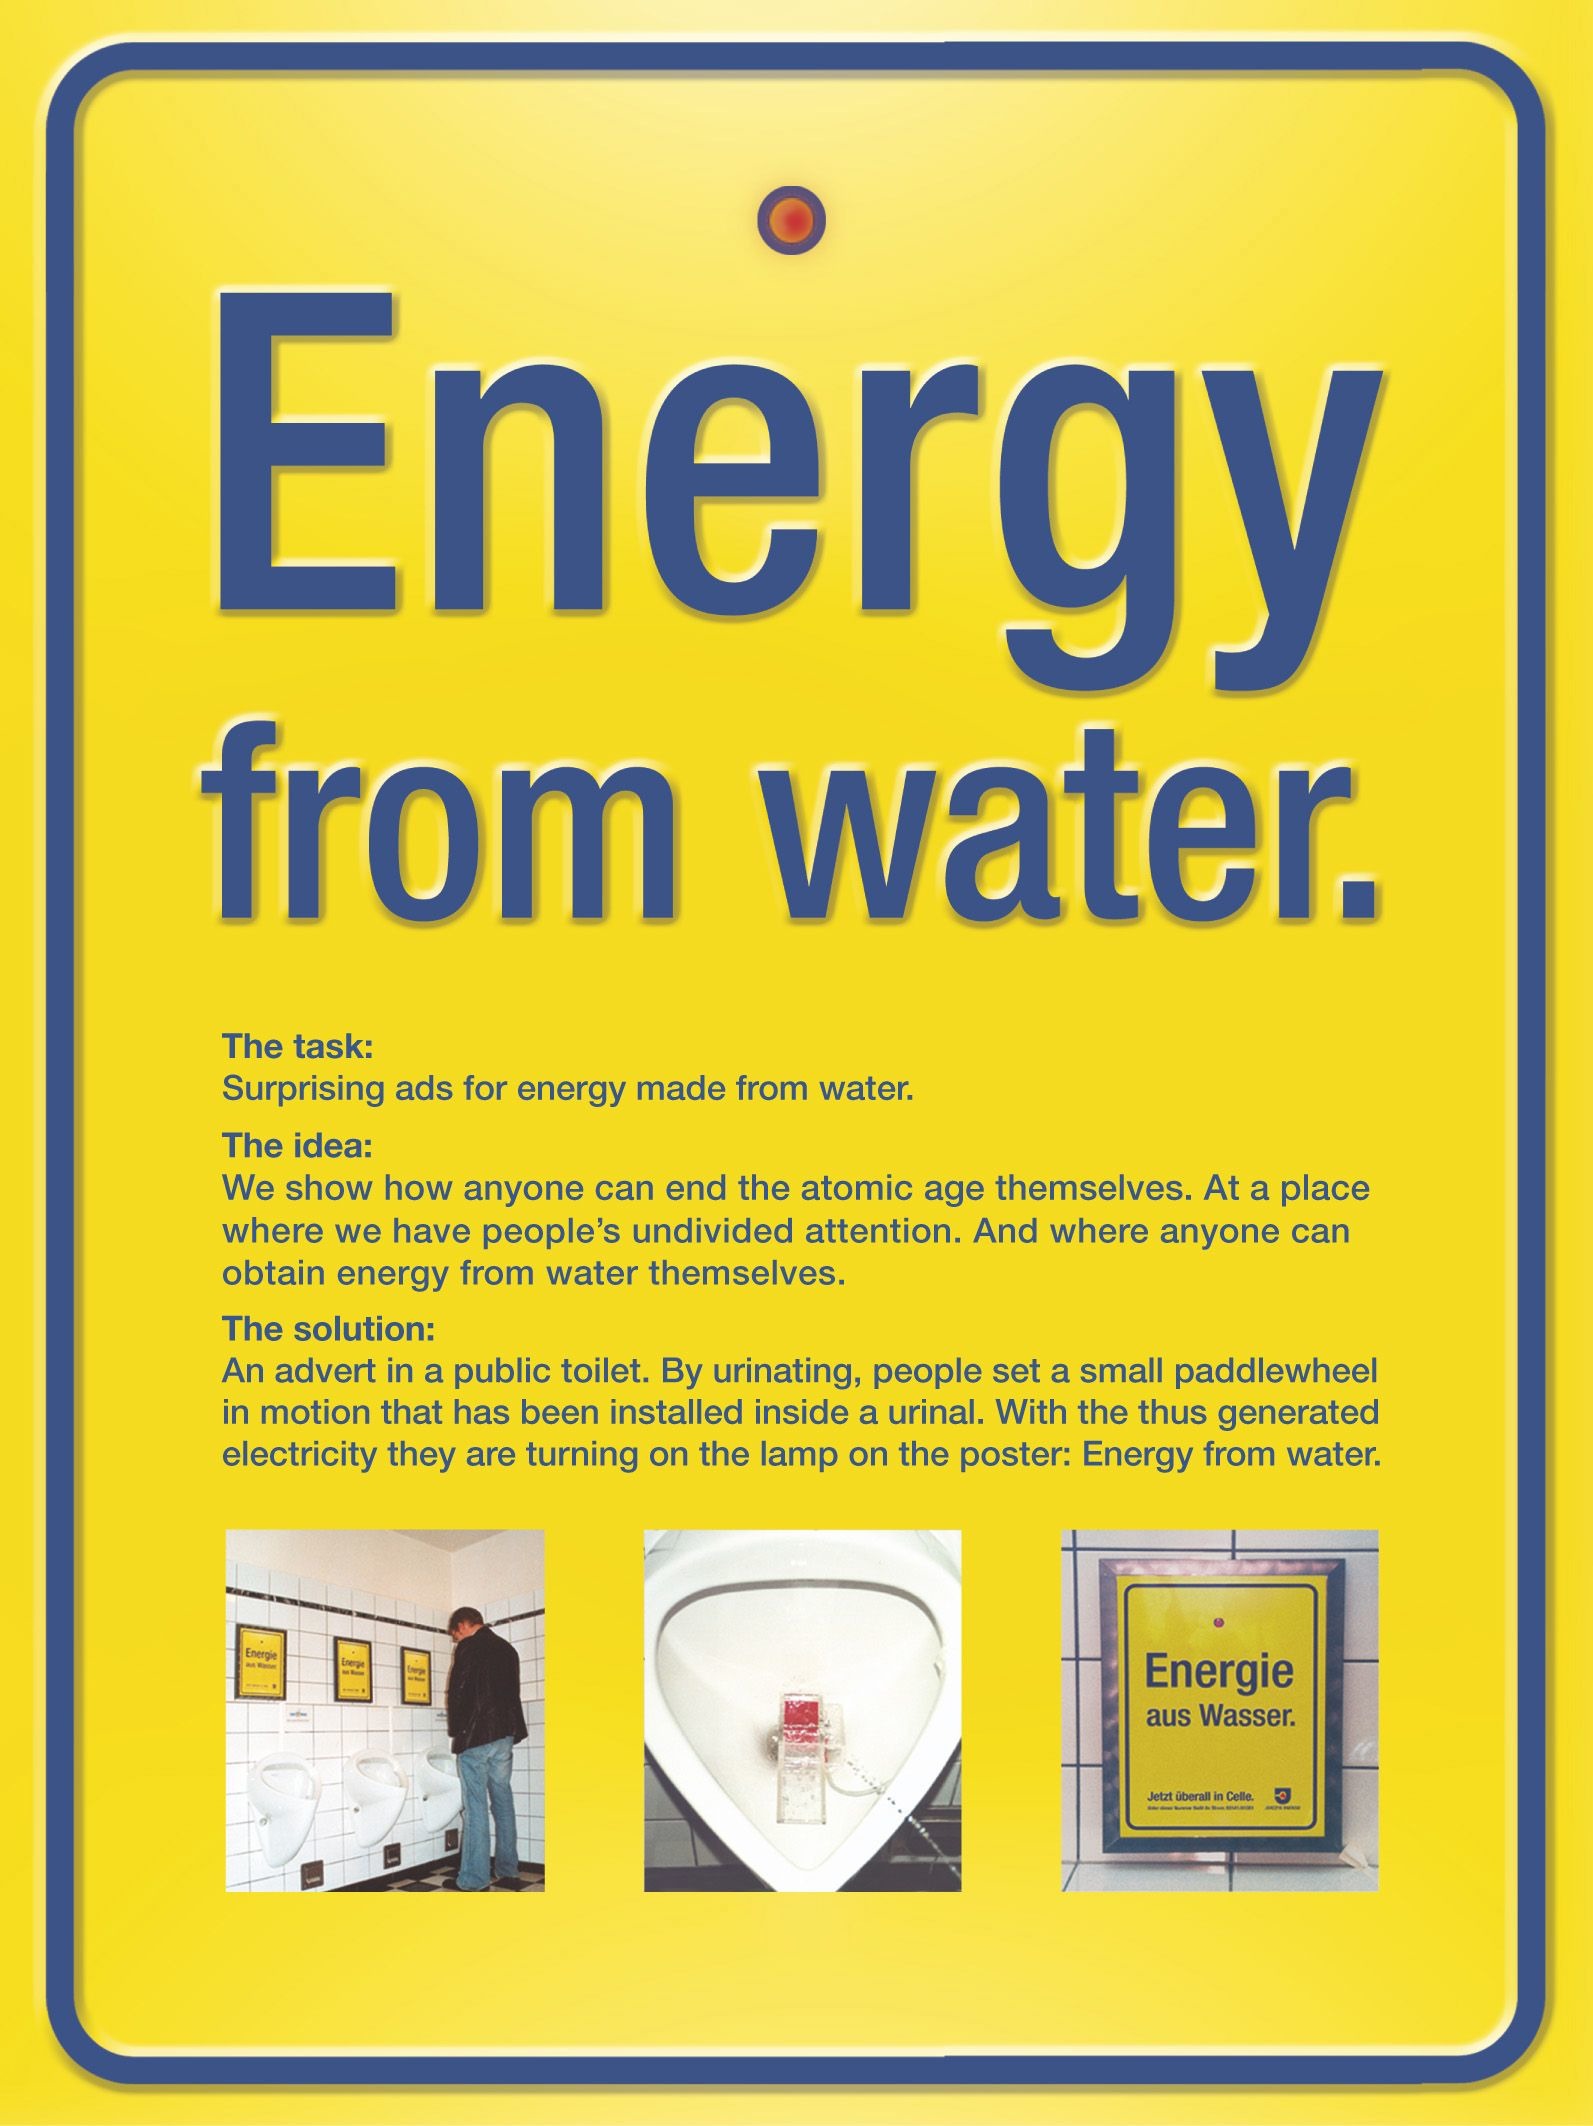 ENERGY FROM WATER